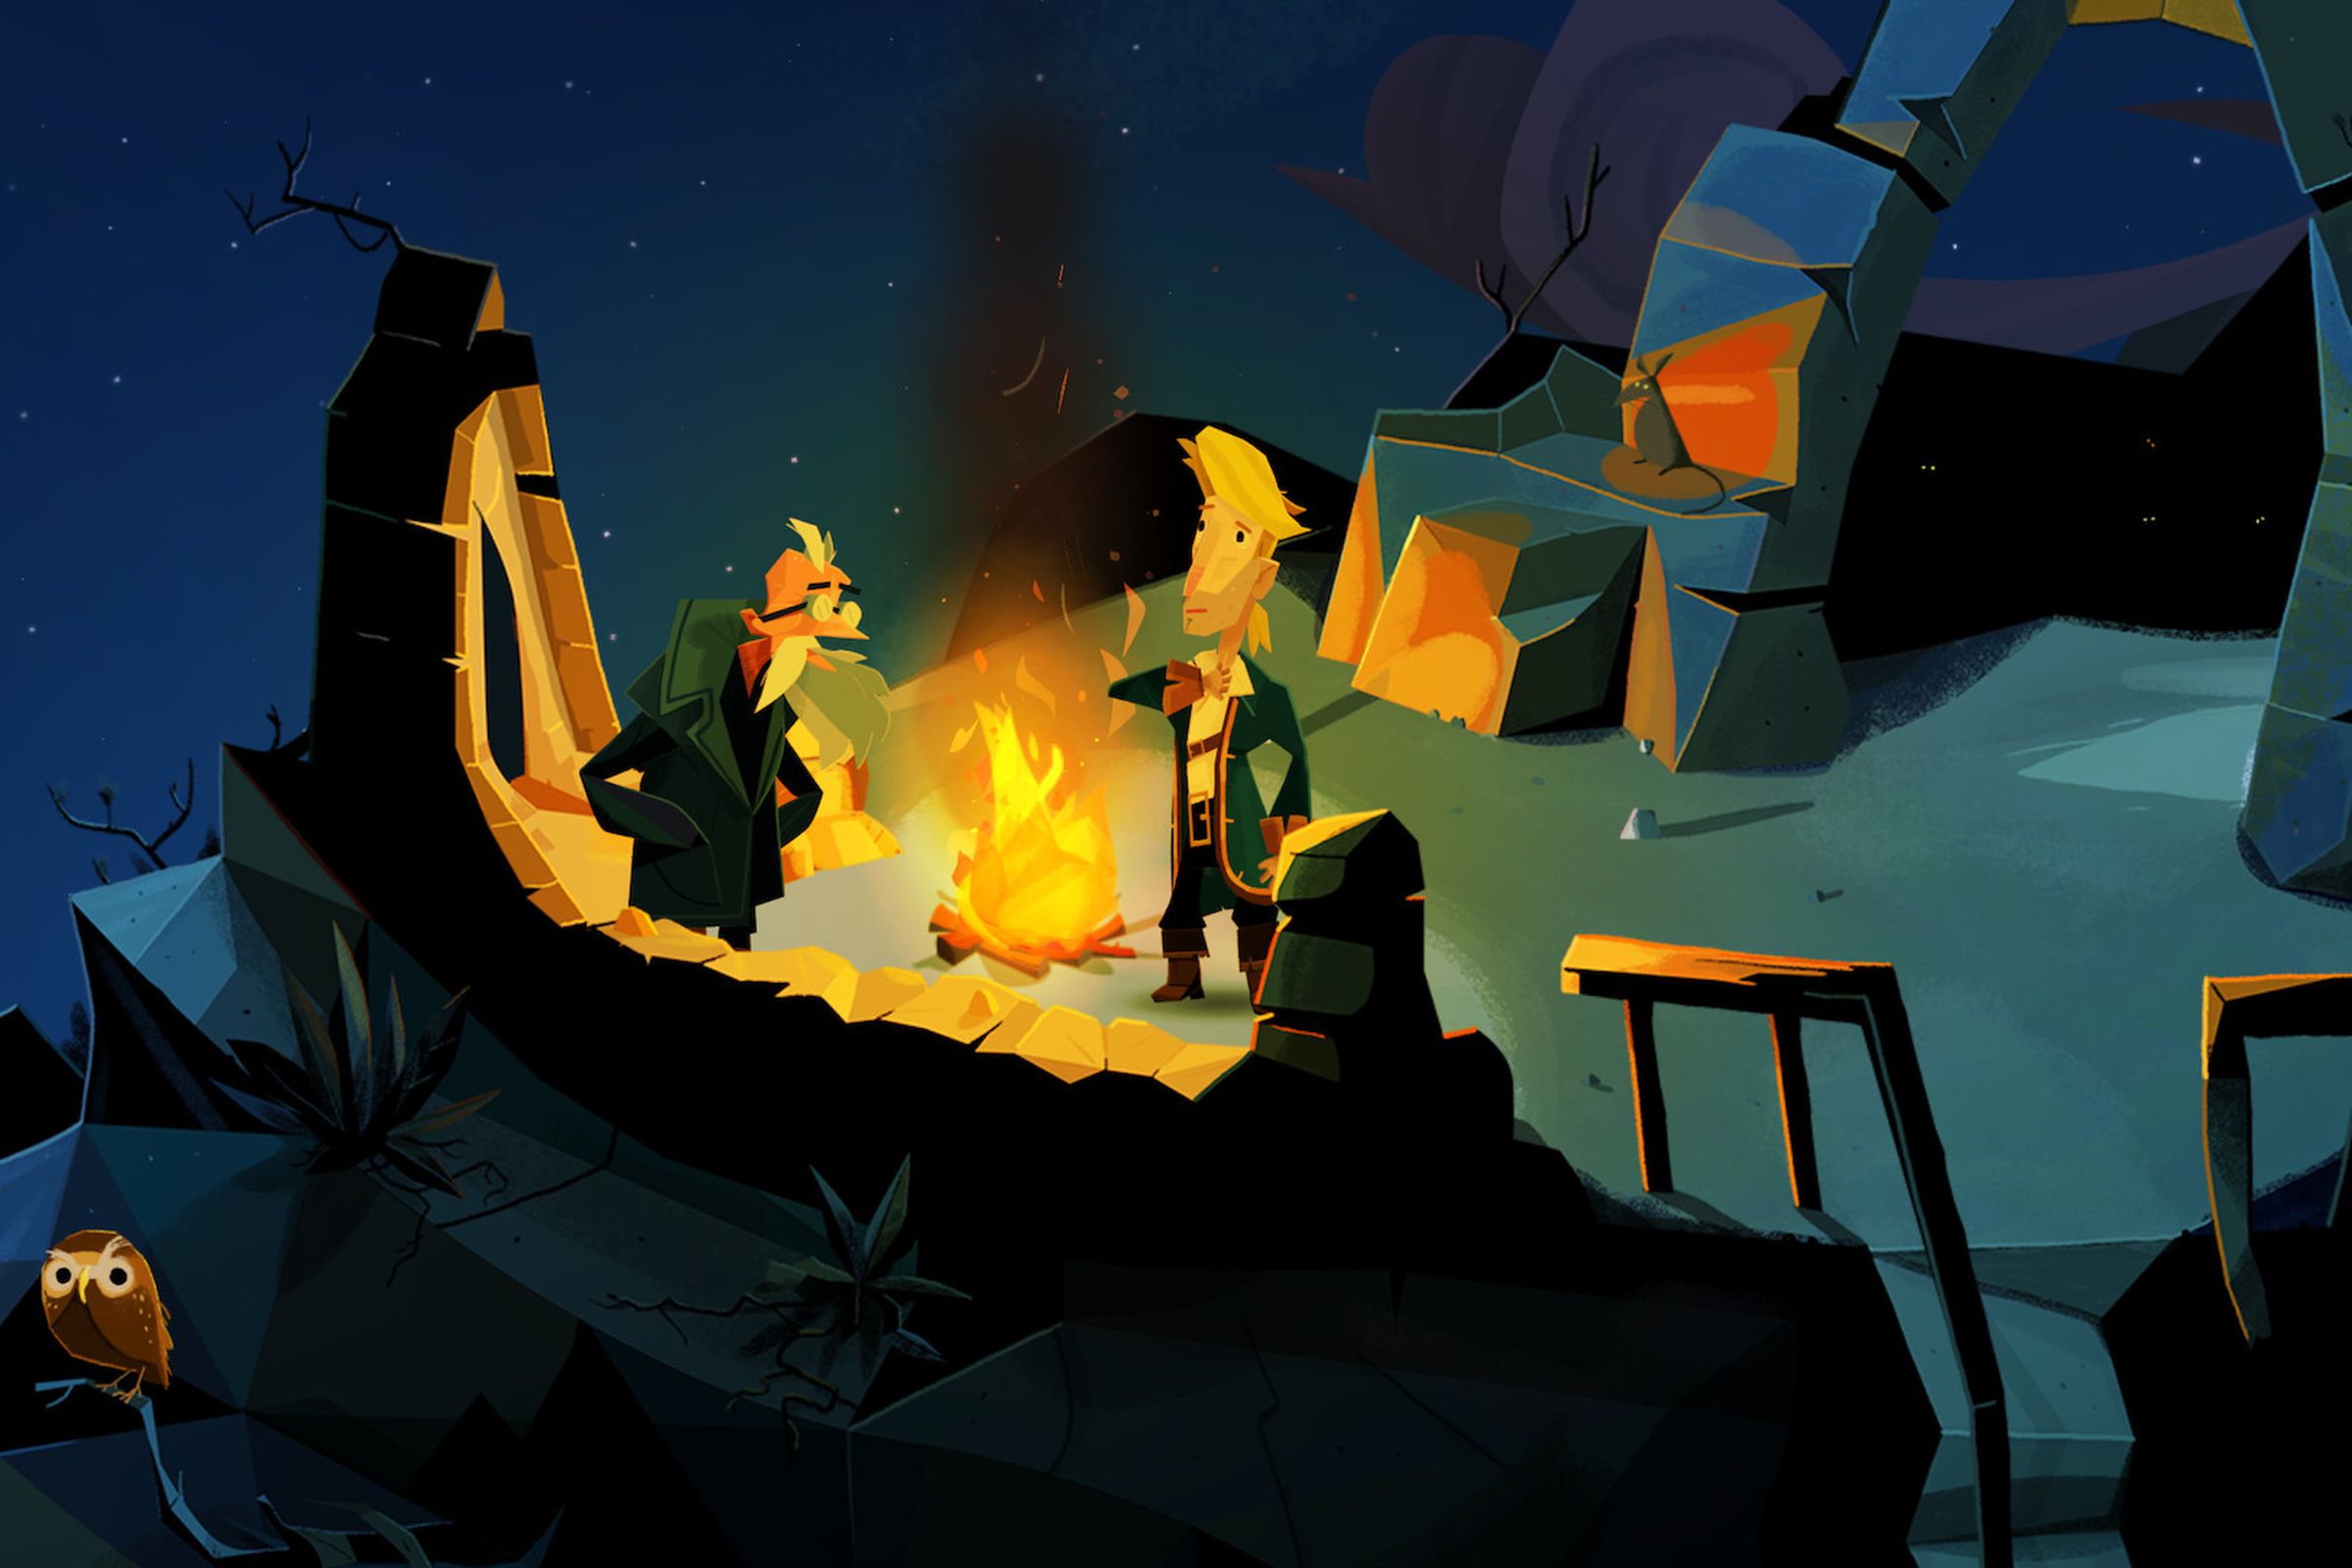 A screenshot from Return to Monkey Island. Protagonist Guybrush Threepwood stands in front of a fire.